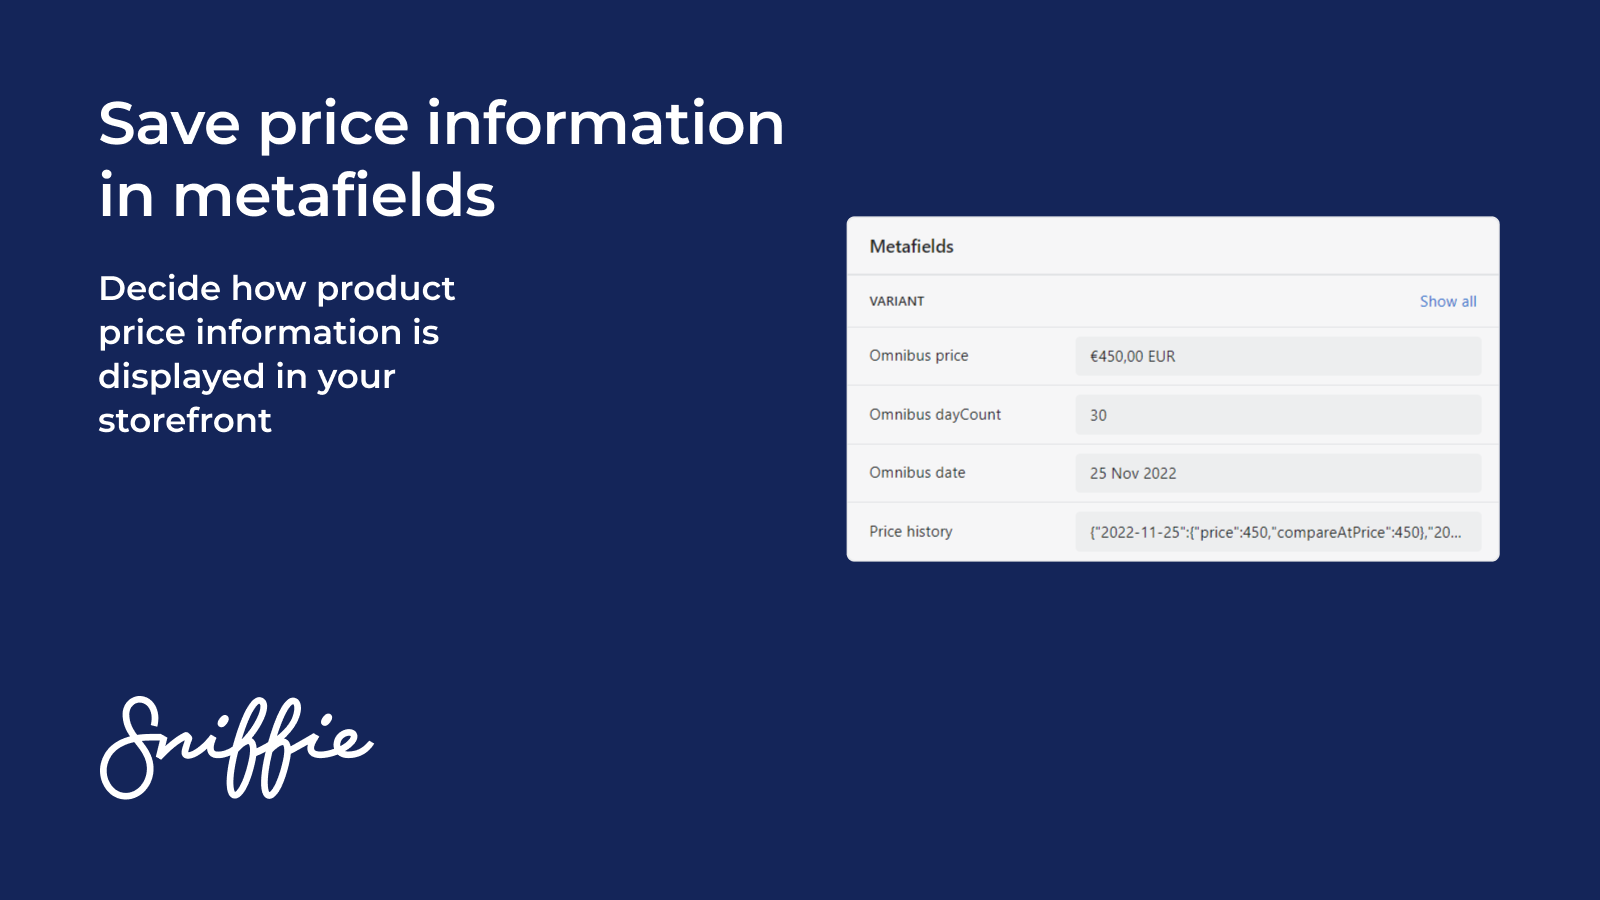 Decide how product price info is displayed in your storefront